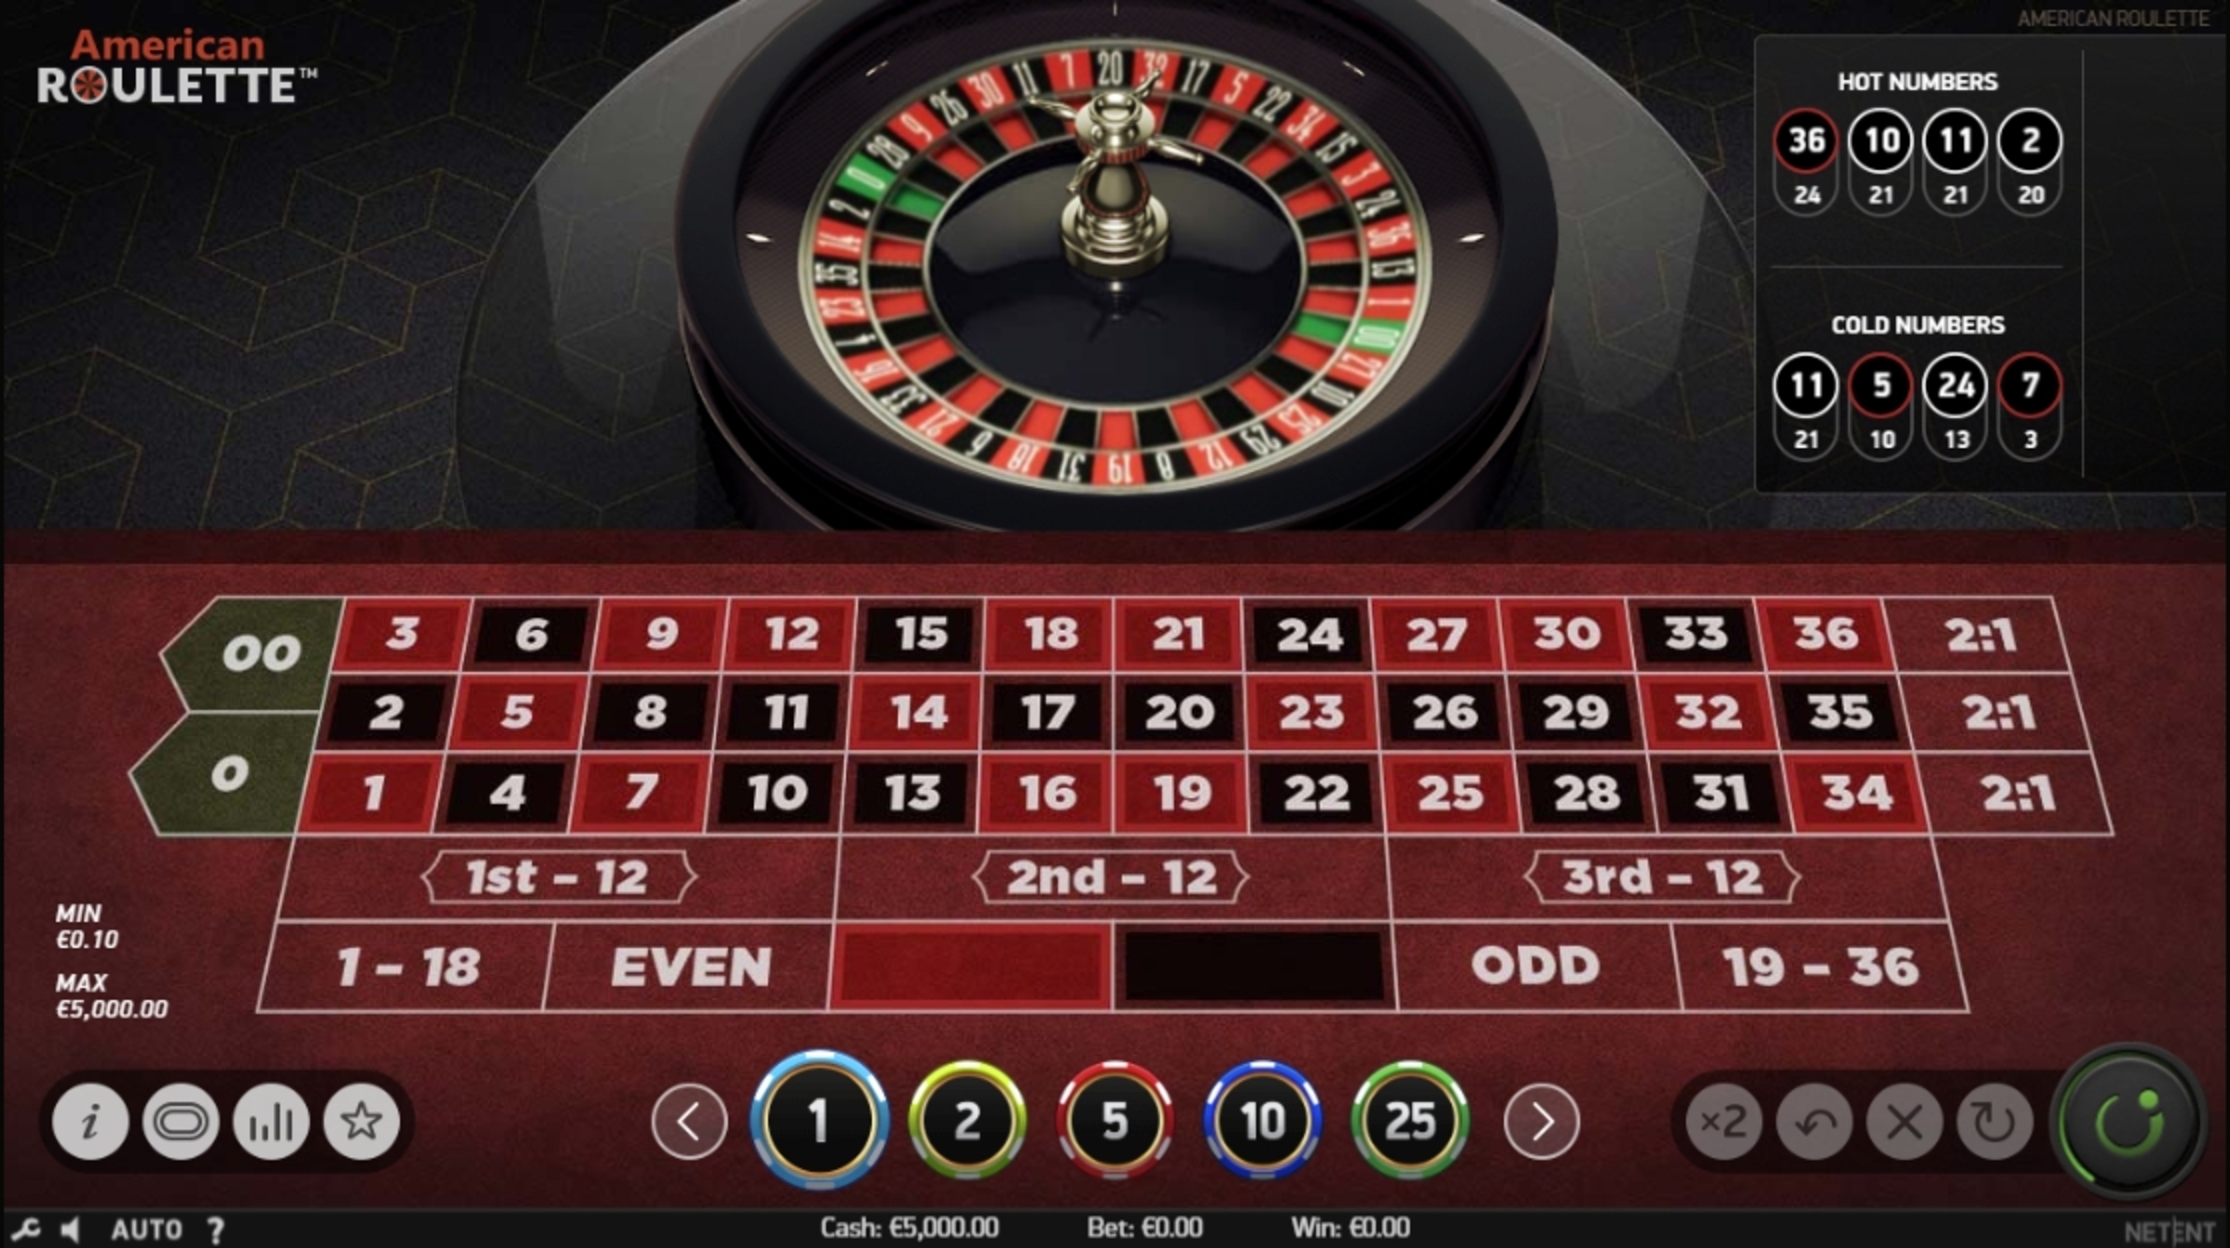 Reels in American Roulette NetEnt Slot Game by NetEnt